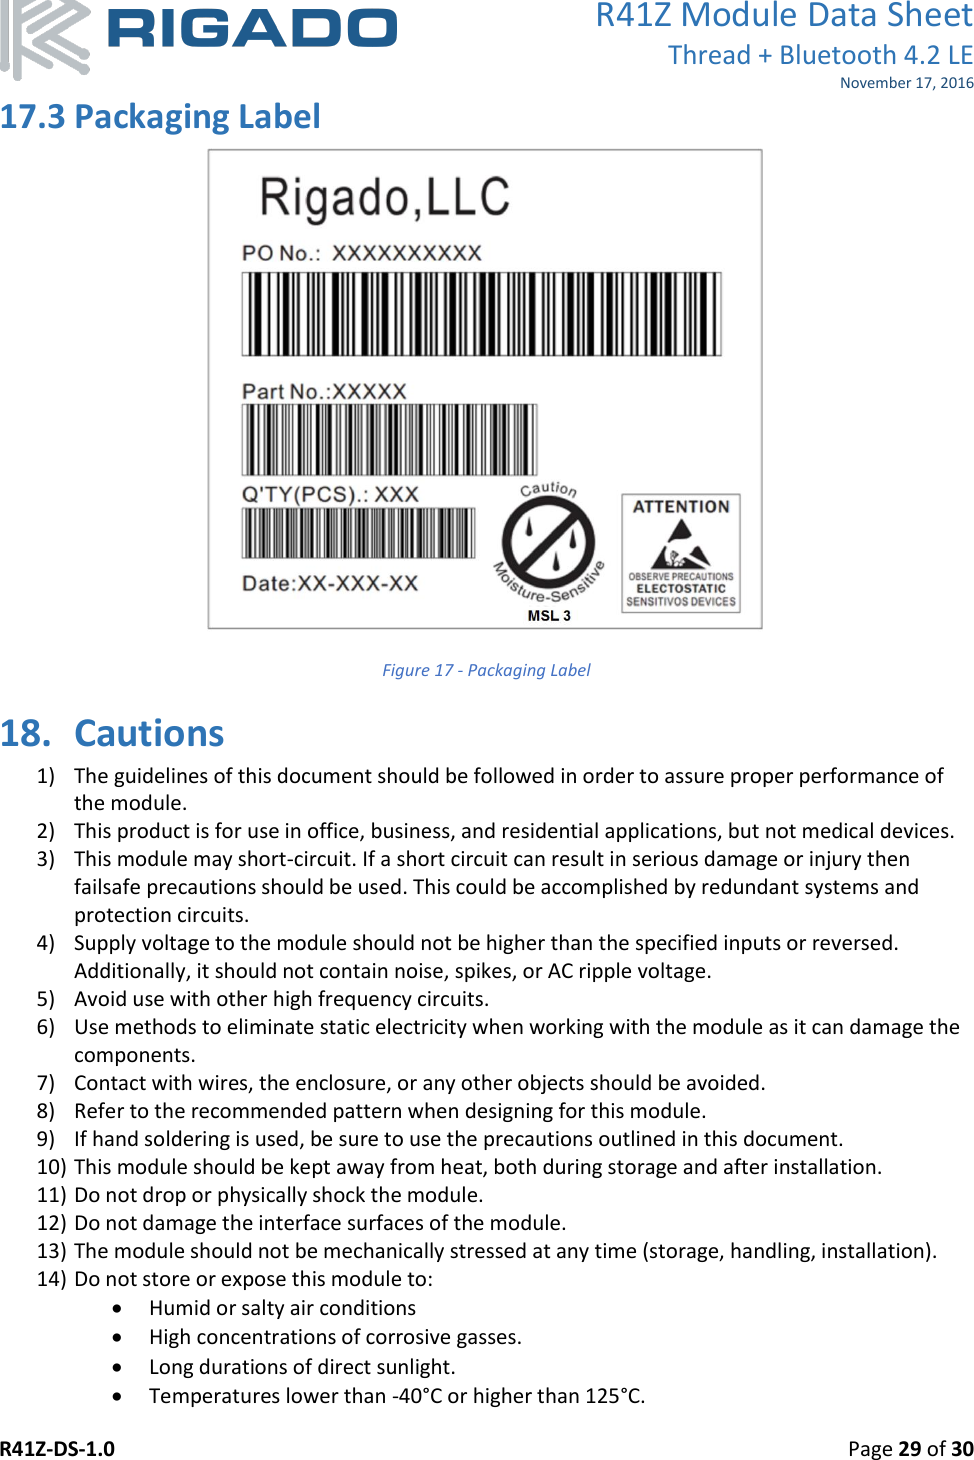 R41Z Module Data Sheet Thread + Bluetooth 4.2 LE November 17, 2016 R41Z-DS-1.0    Page 29 of 30  17.3 Packaging Label  Figure 17 - Packaging Label 18. Cautions 1) The guidelines of this document should be followed in order to assure proper performance of the module. 2) This product is for use in office, business, and residential applications, but not medical devices. 3) This module may short-circuit. If a short circuit can result in serious damage or injury then failsafe precautions should be used. This could be accomplished by redundant systems and protection circuits. 4) Supply voltage to the module should not be higher than the specified inputs or reversed. Additionally, it should not contain noise, spikes, or AC ripple voltage. 5) Avoid use with other high frequency circuits. 6) Use methods to eliminate static electricity when working with the module as it can damage the components. 7) Contact with wires, the enclosure, or any other objects should be avoided. 8) Refer to the recommended pattern when designing for this module. 9) If hand soldering is used, be sure to use the precautions outlined in this document. 10) This module should be kept away from heat, both during storage and after installation. 11) Do not drop or physically shock the module. 12) Do not damage the interface surfaces of the module. 13) The module should not be mechanically stressed at any time (storage, handling, installation). 14) Do not store or expose this module to:  Humid or salty air conditions  High concentrations of corrosive gasses.  Long durations of direct sunlight.  Temperatures lower than -40°C or higher than 125°C. 